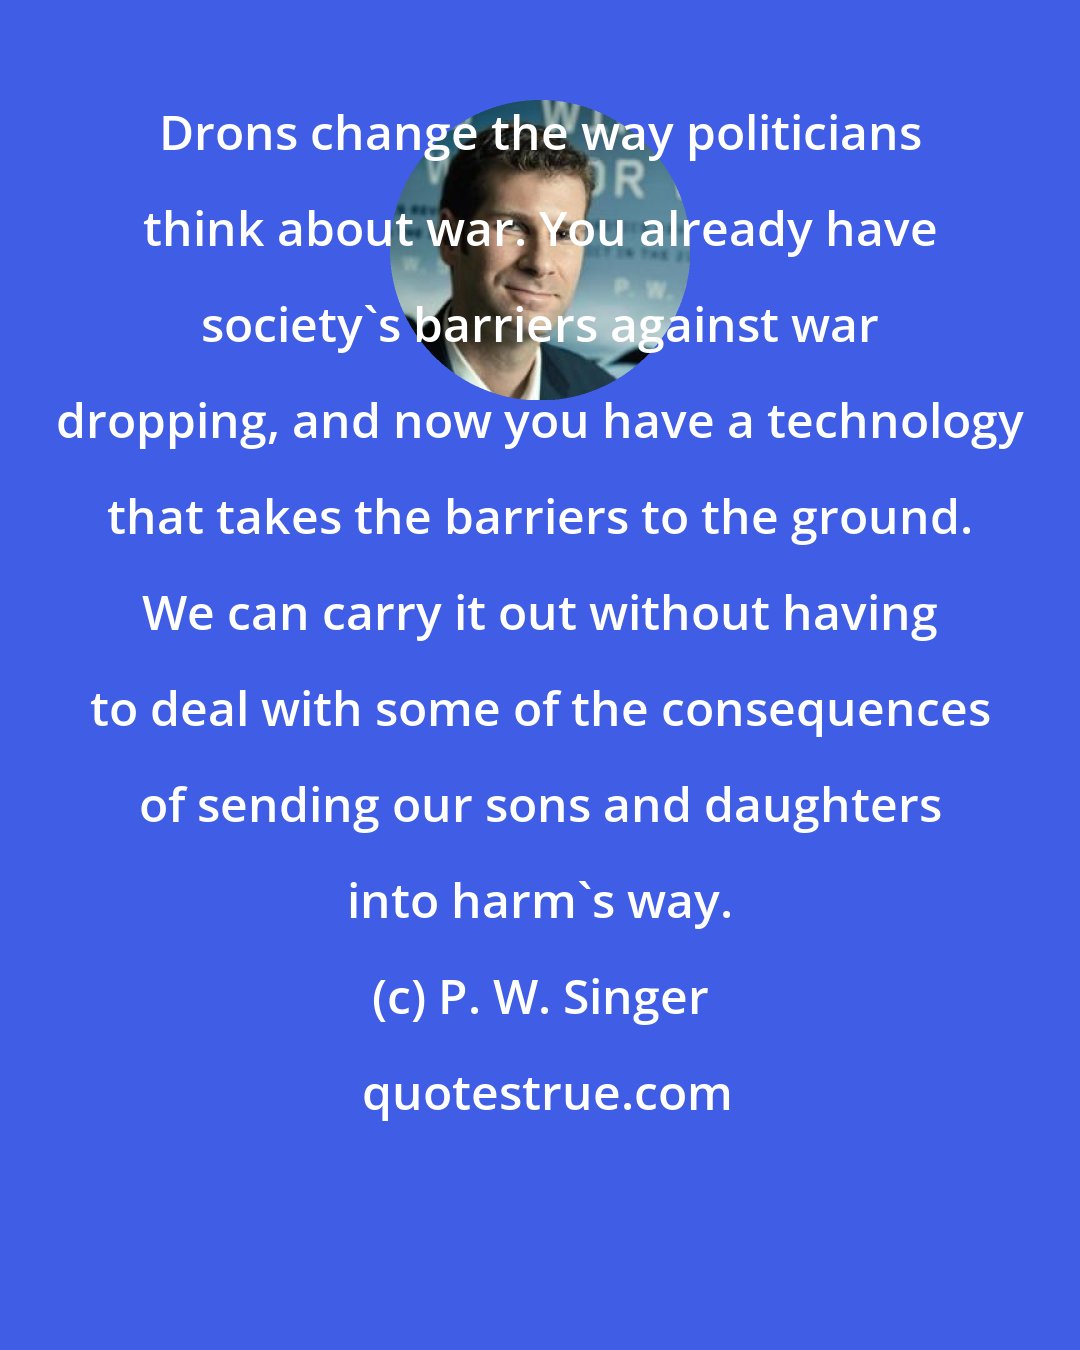 P. W. Singer: Drons change the way politicians think about war. You already have society's barriers against war dropping, and now you have a technology that takes the barriers to the ground. We can carry it out without having to deal with some of the consequences of sending our sons and daughters into harm's way.